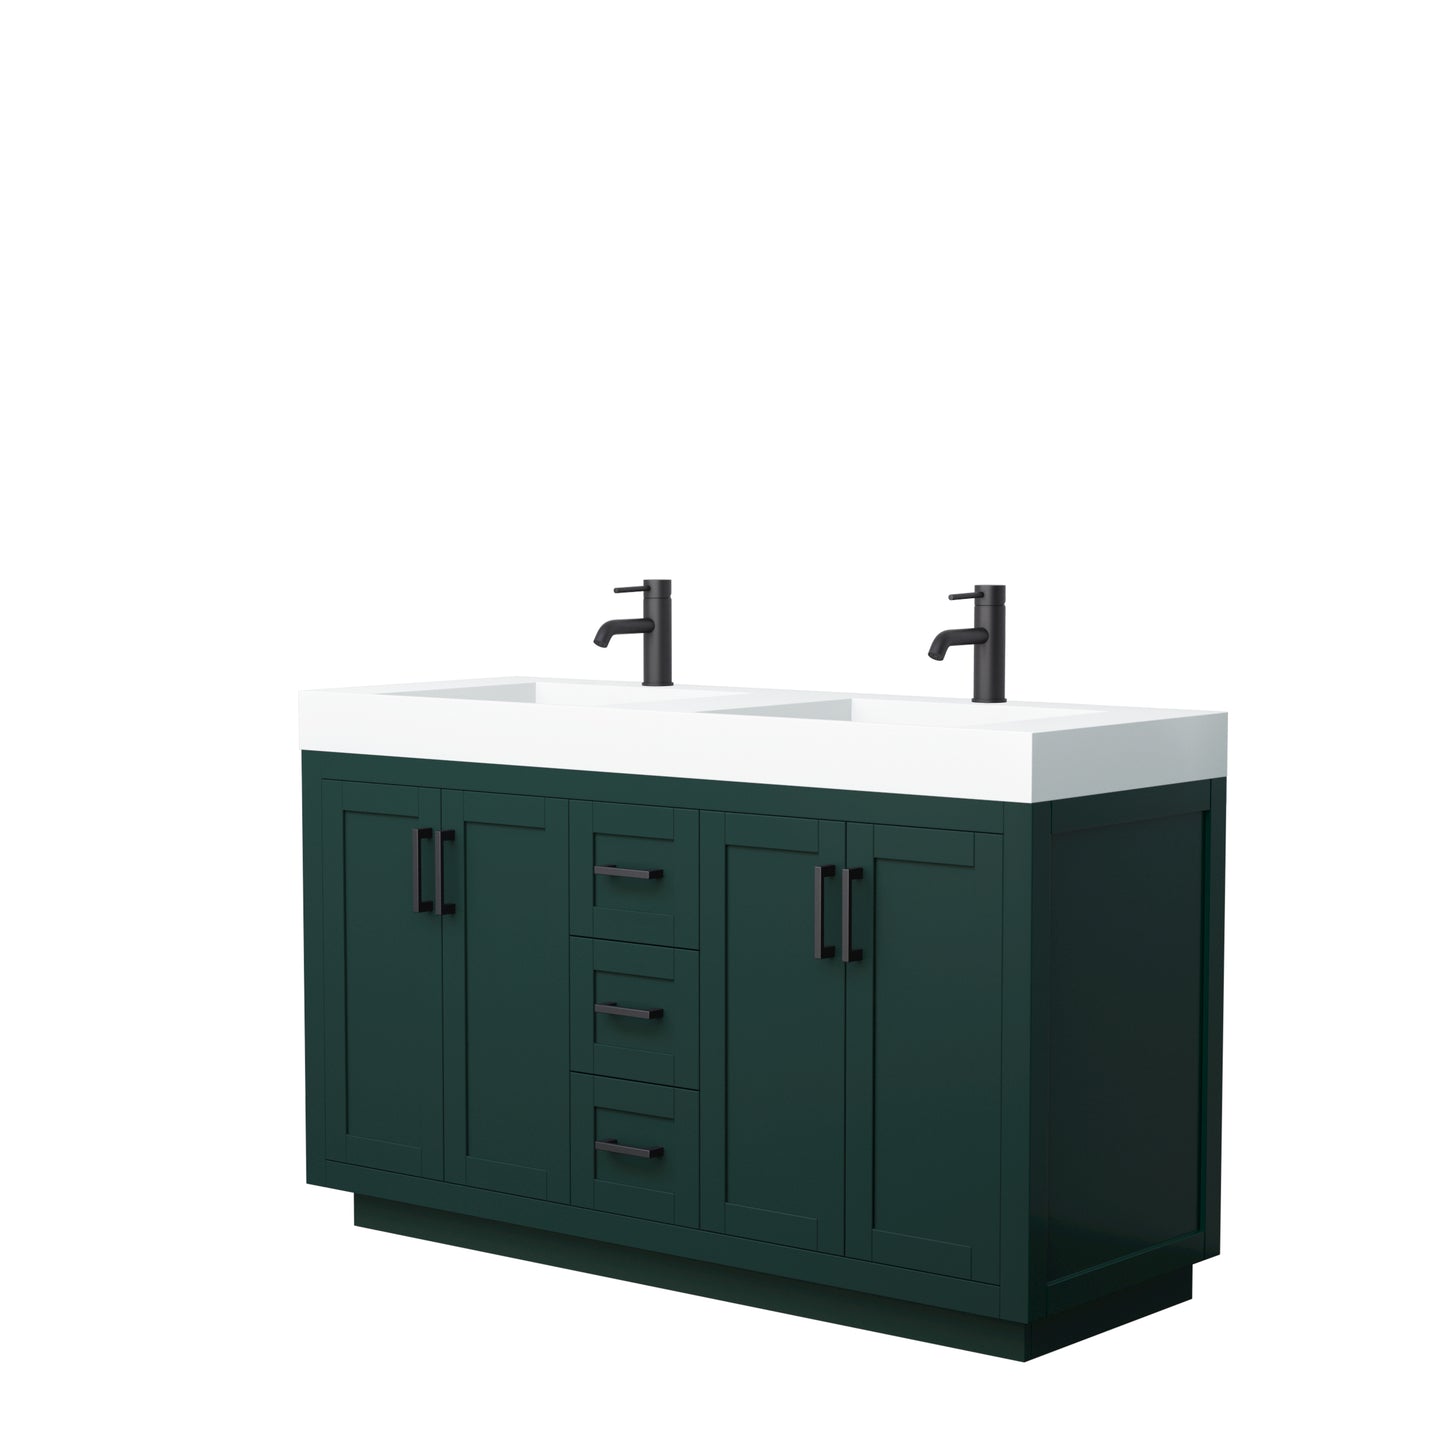 Wyndham Miranda 60 Inch Double Bathroom Vanity in Green with 4 Inch Thick Matte White Solid Surface Integrated Countertop Sinks and Trim - Luxe Bathroom Vanities